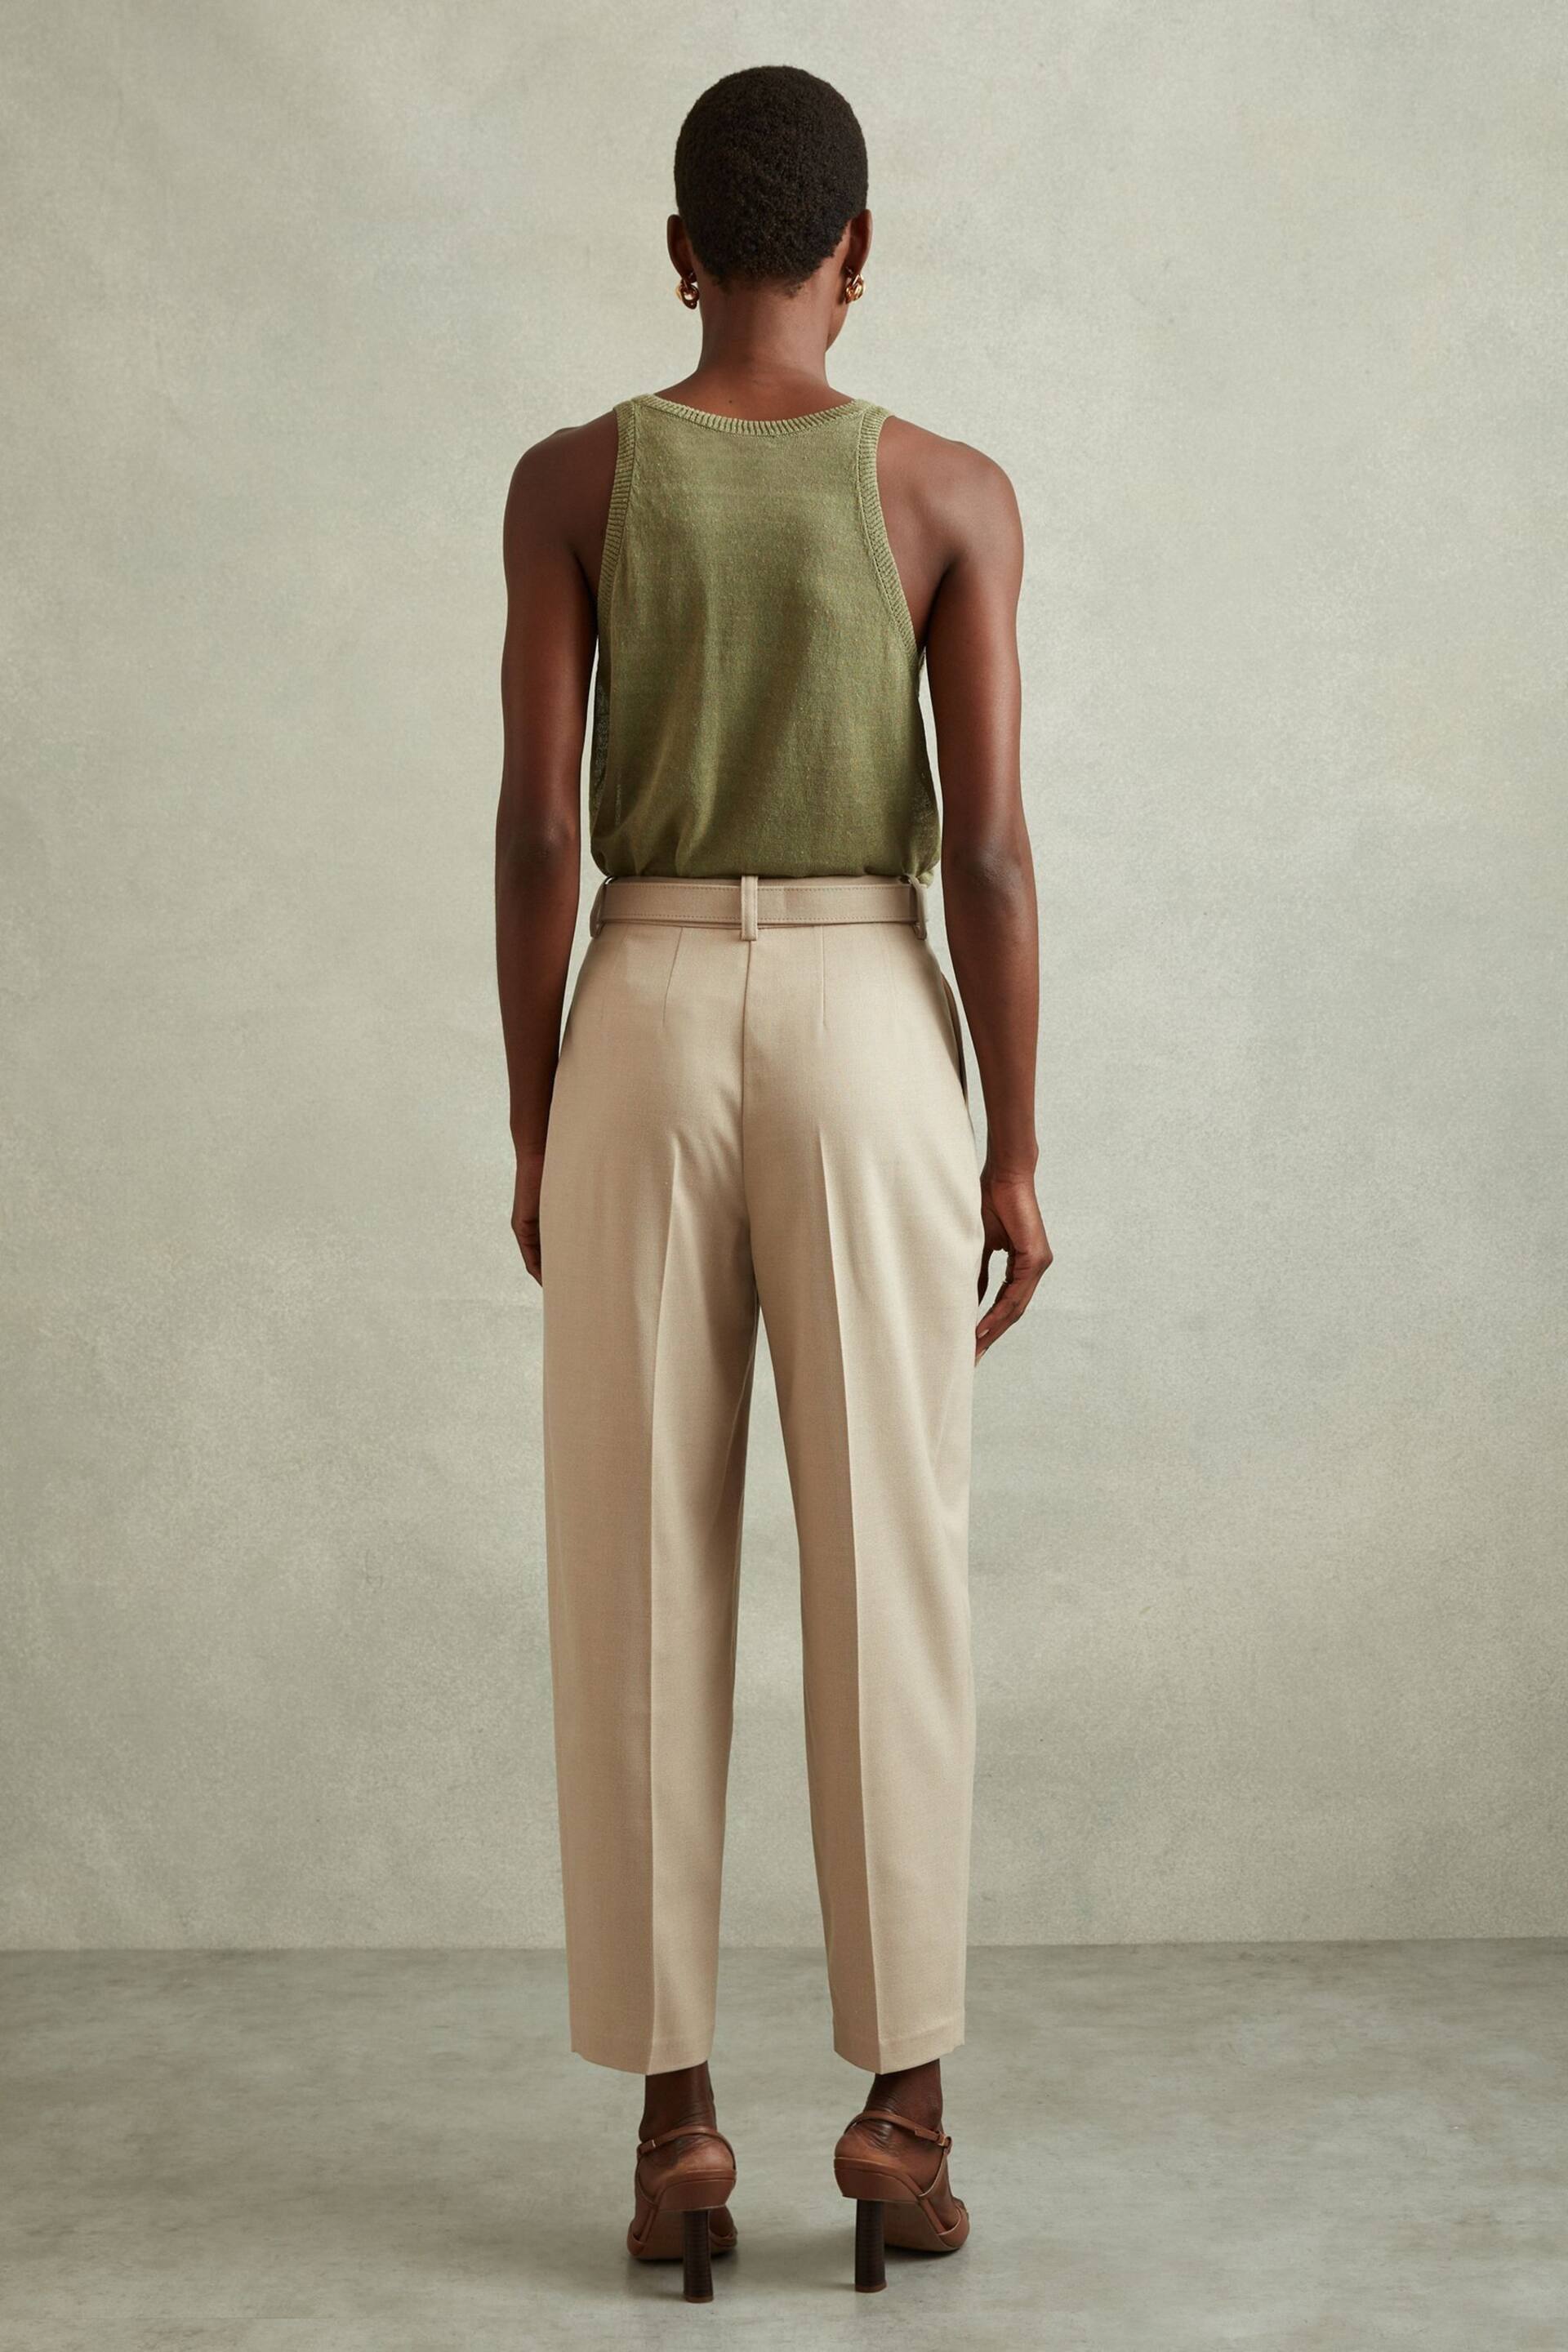 Reiss Neutral Freja Petite Tapered Belted Trousers - Image 5 of 7